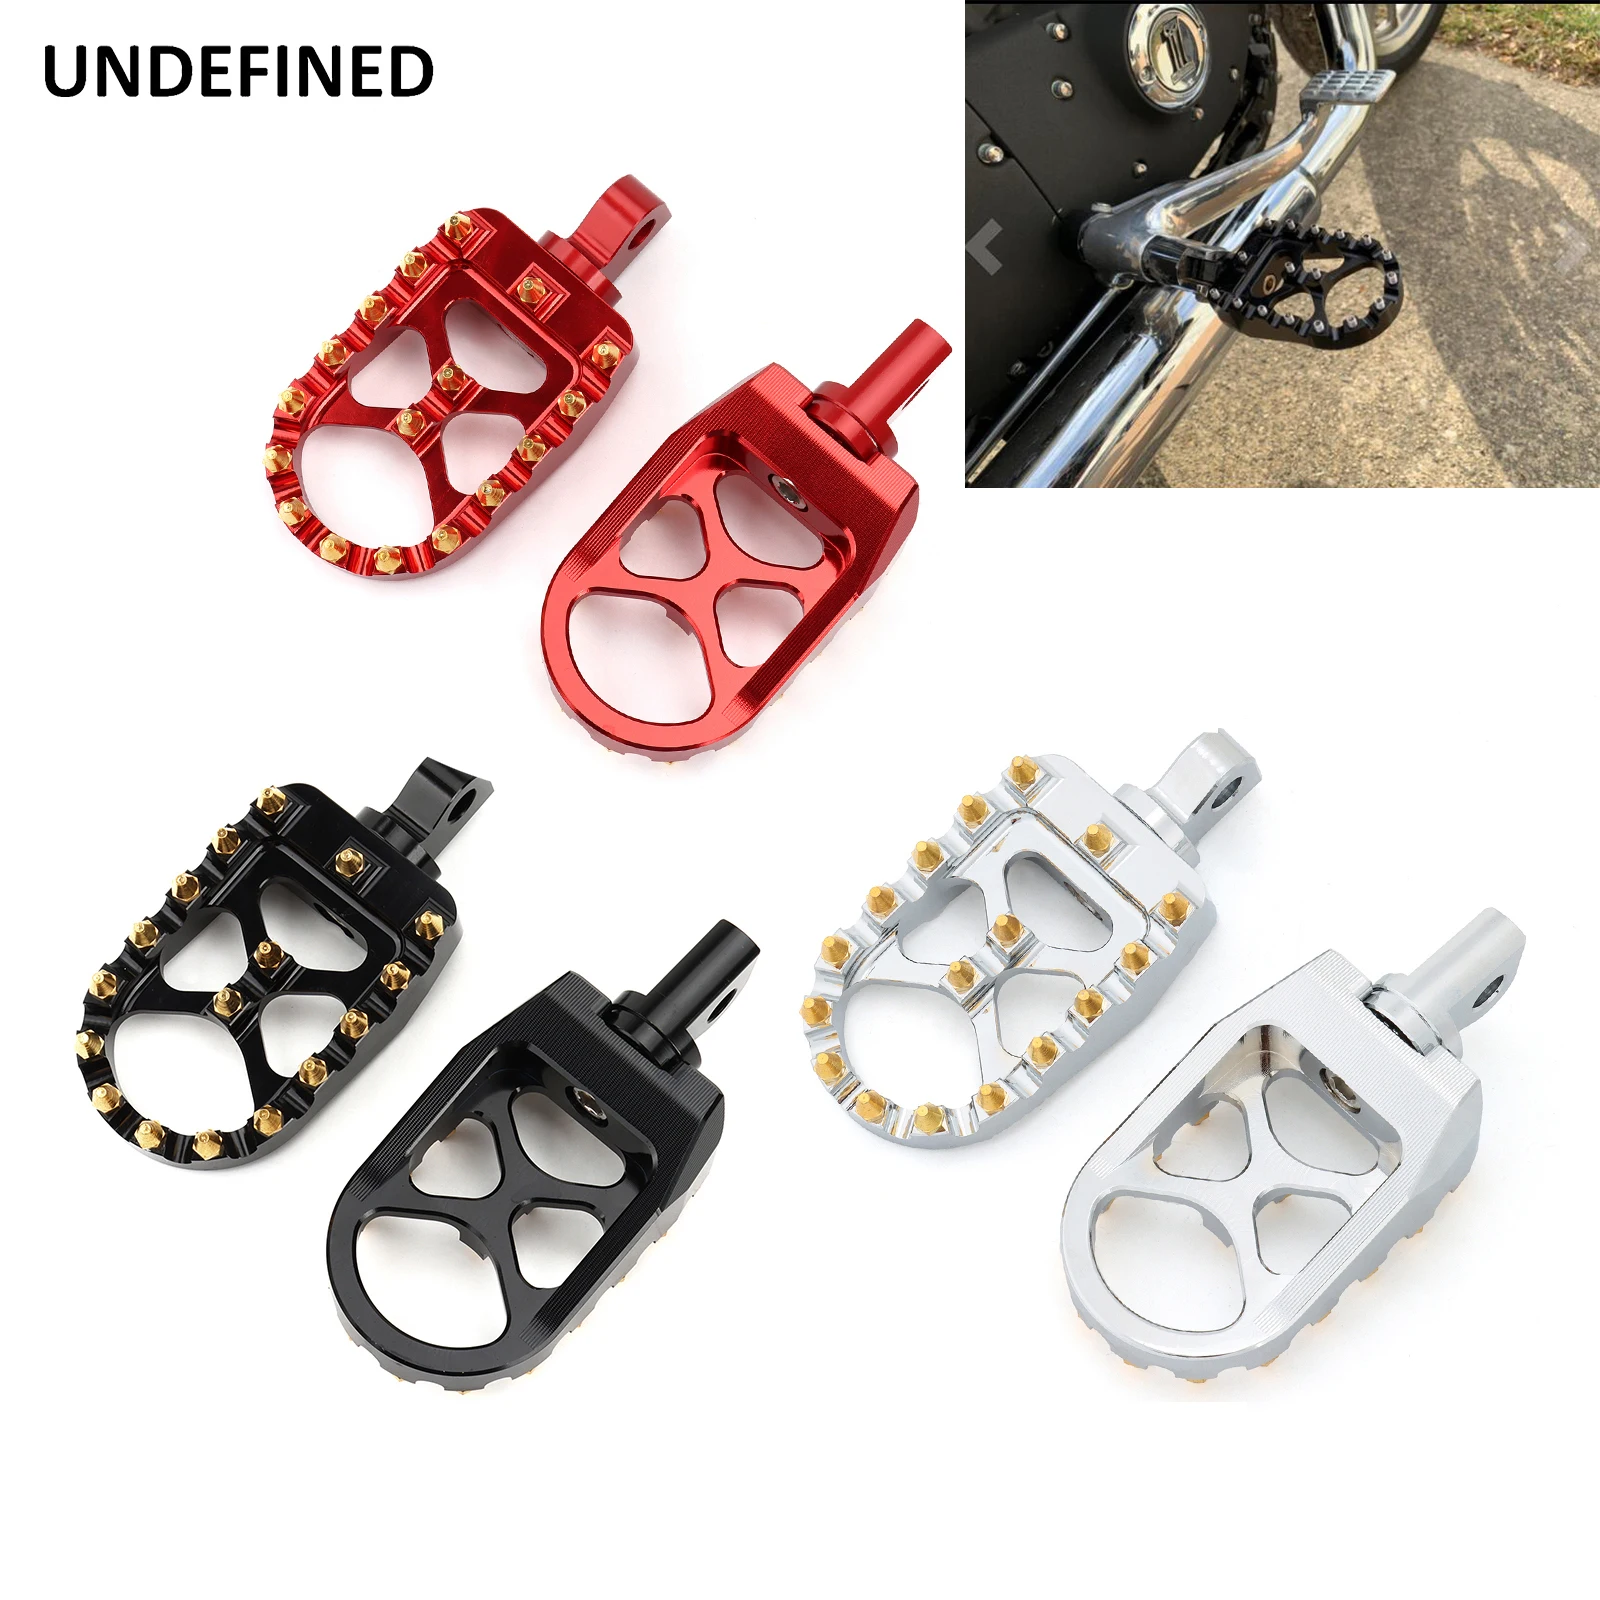 Wide Foot Pegs MX Style 360 Roating CNC Fat Footrest Chopper Bobber For Dyna Sportster Iron 883 Fatboy Wide Glide Low Rider FXDL Black 